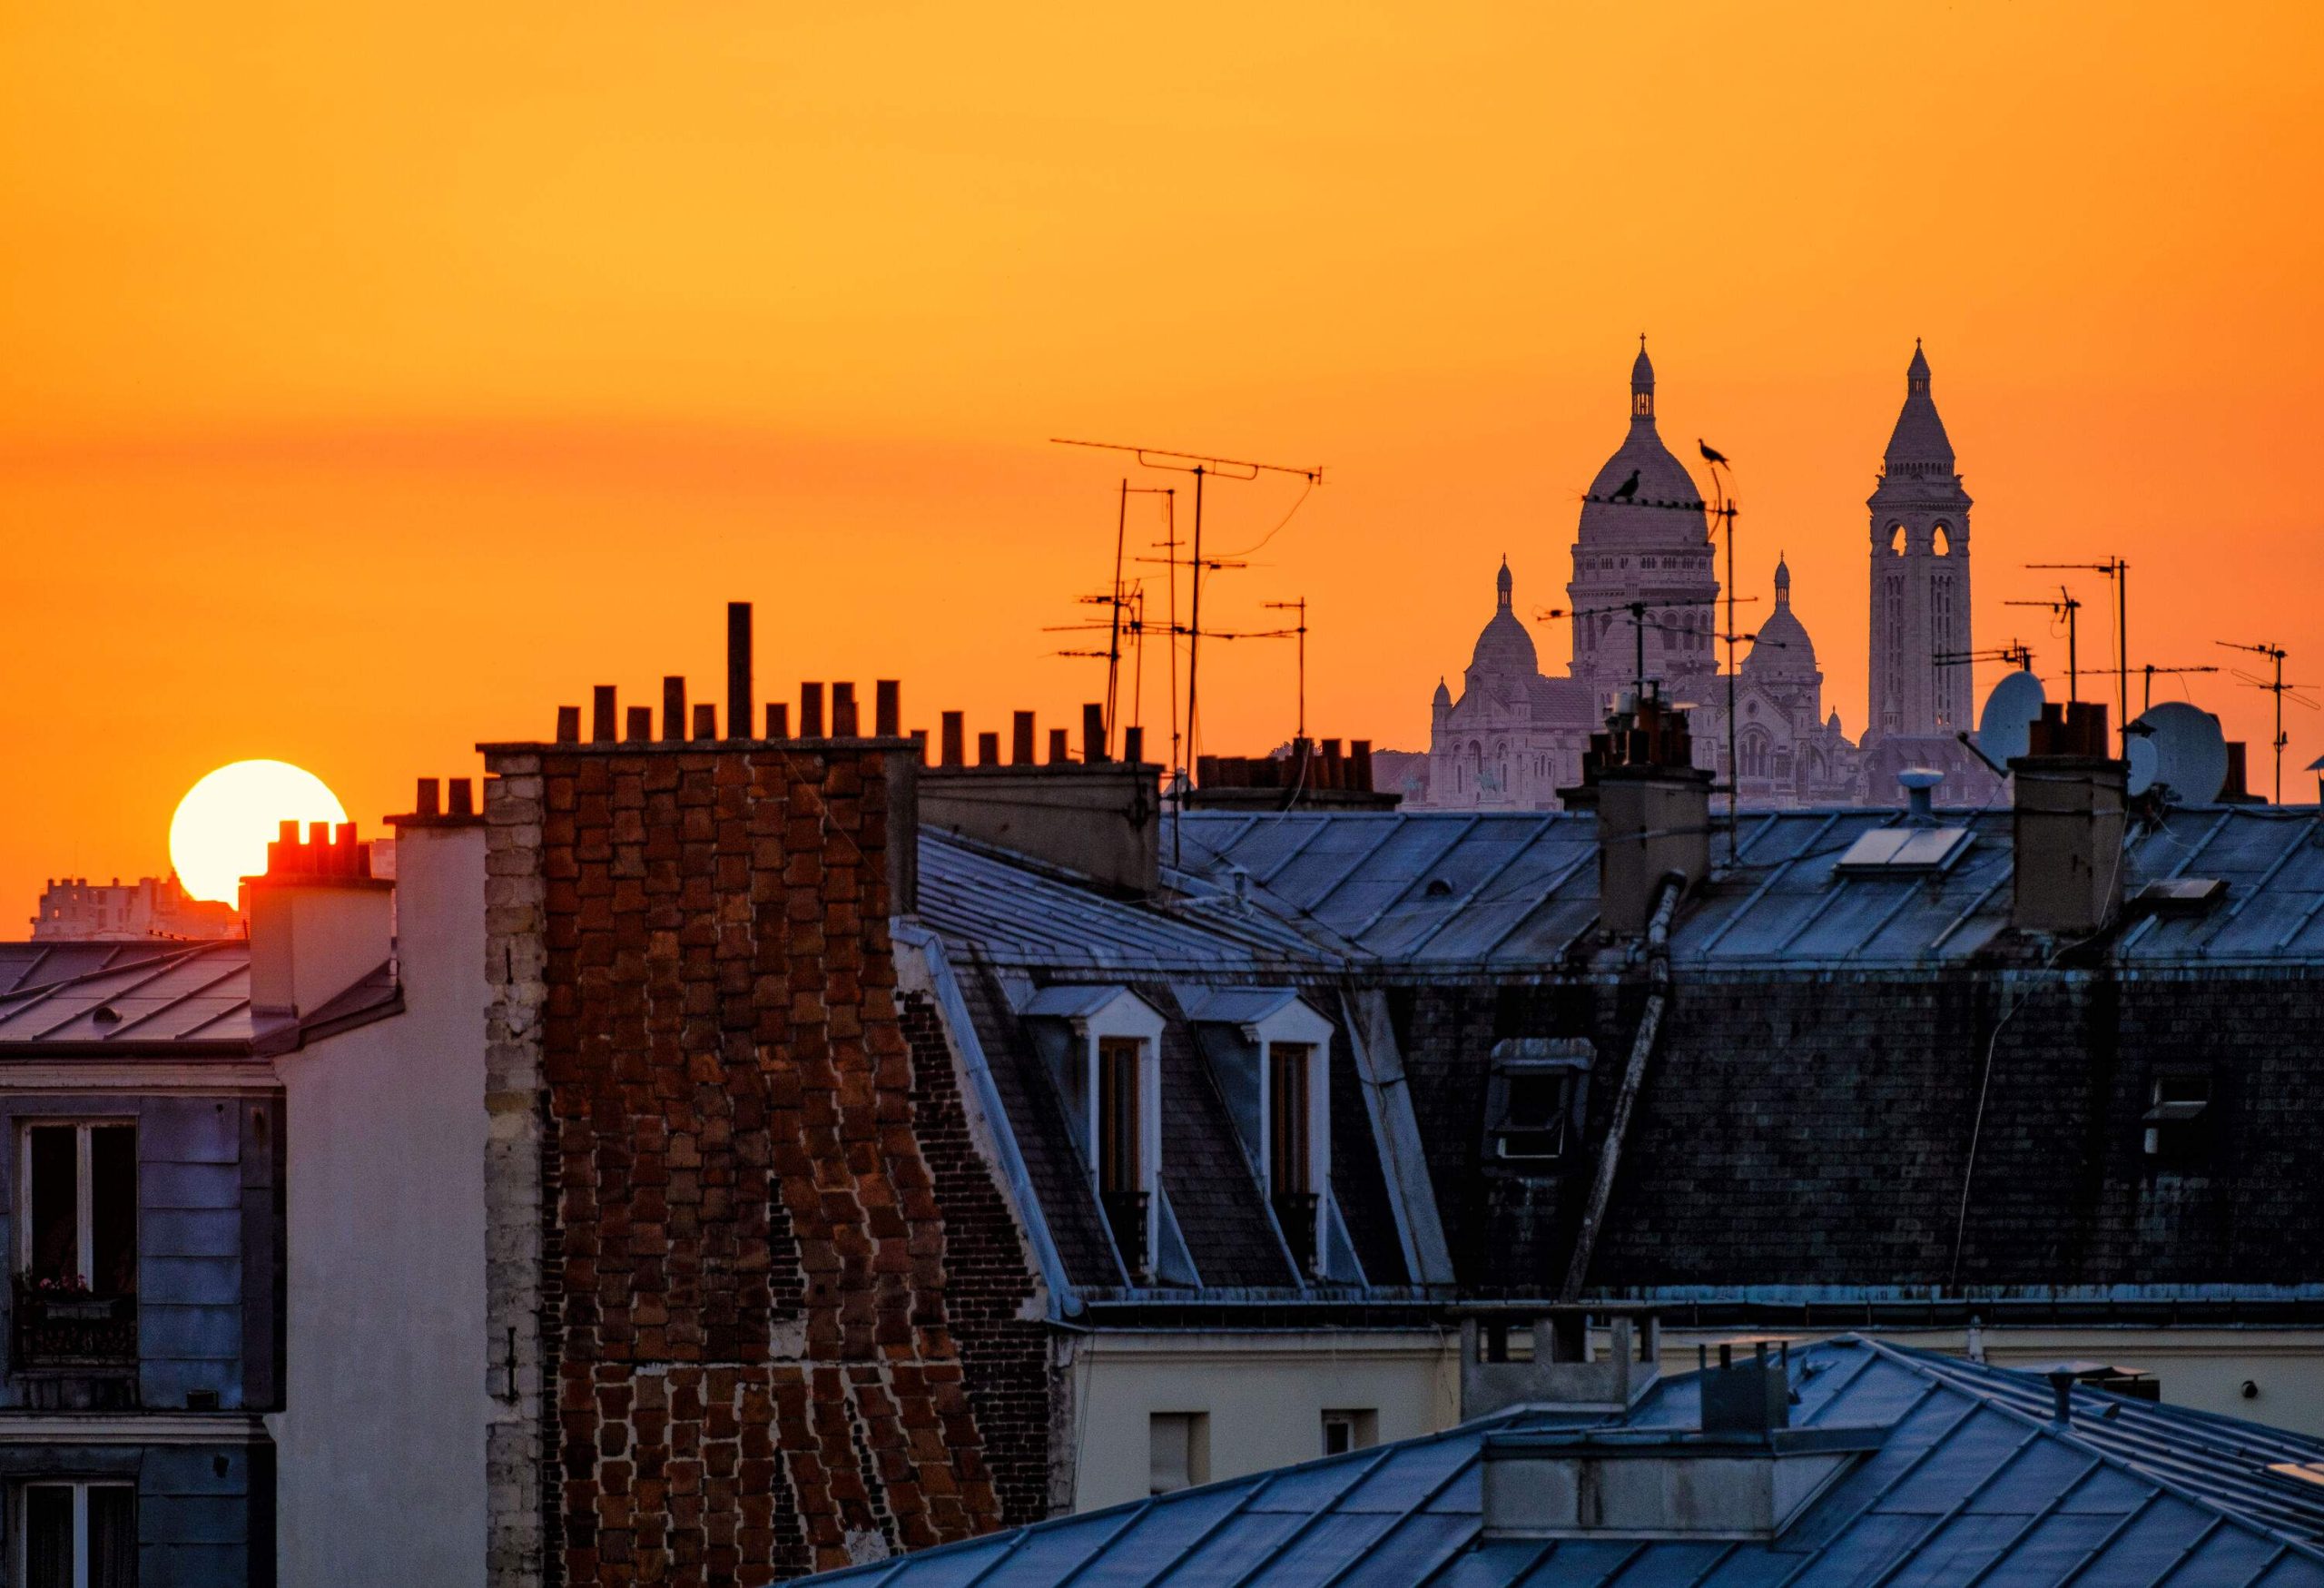 Iconic bell towers and building rooftops set against a yellow orange sunset sky.